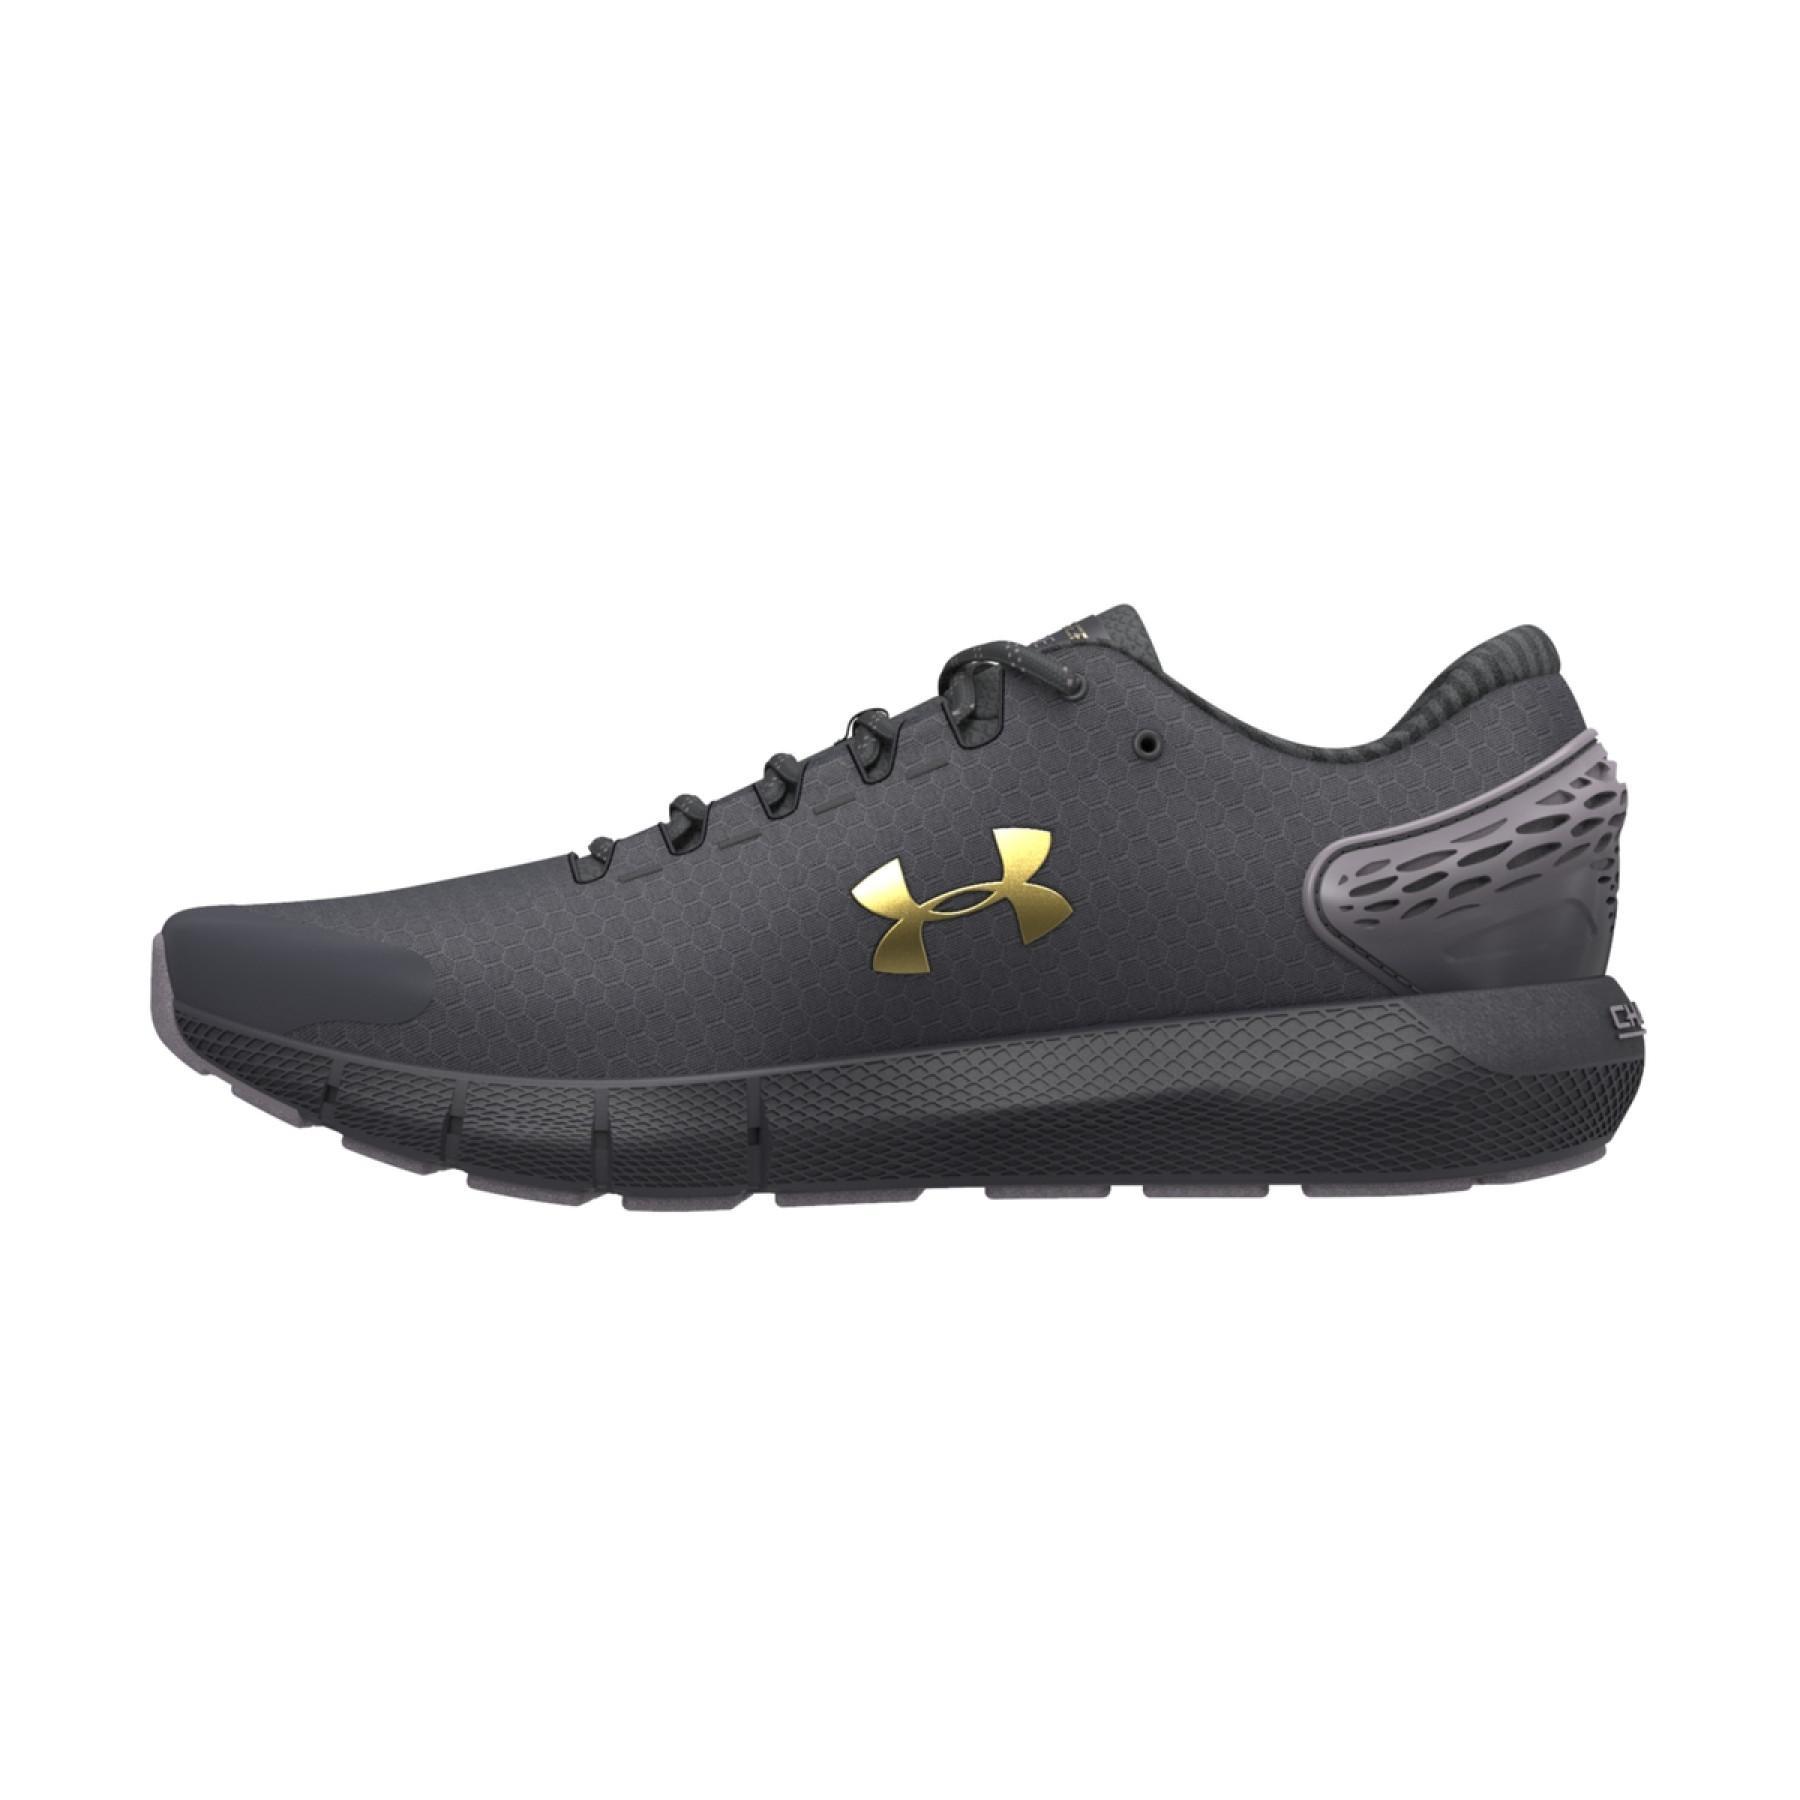 Chaussures de running Under Armour Charged Rogue 2 ColdGear Infrared